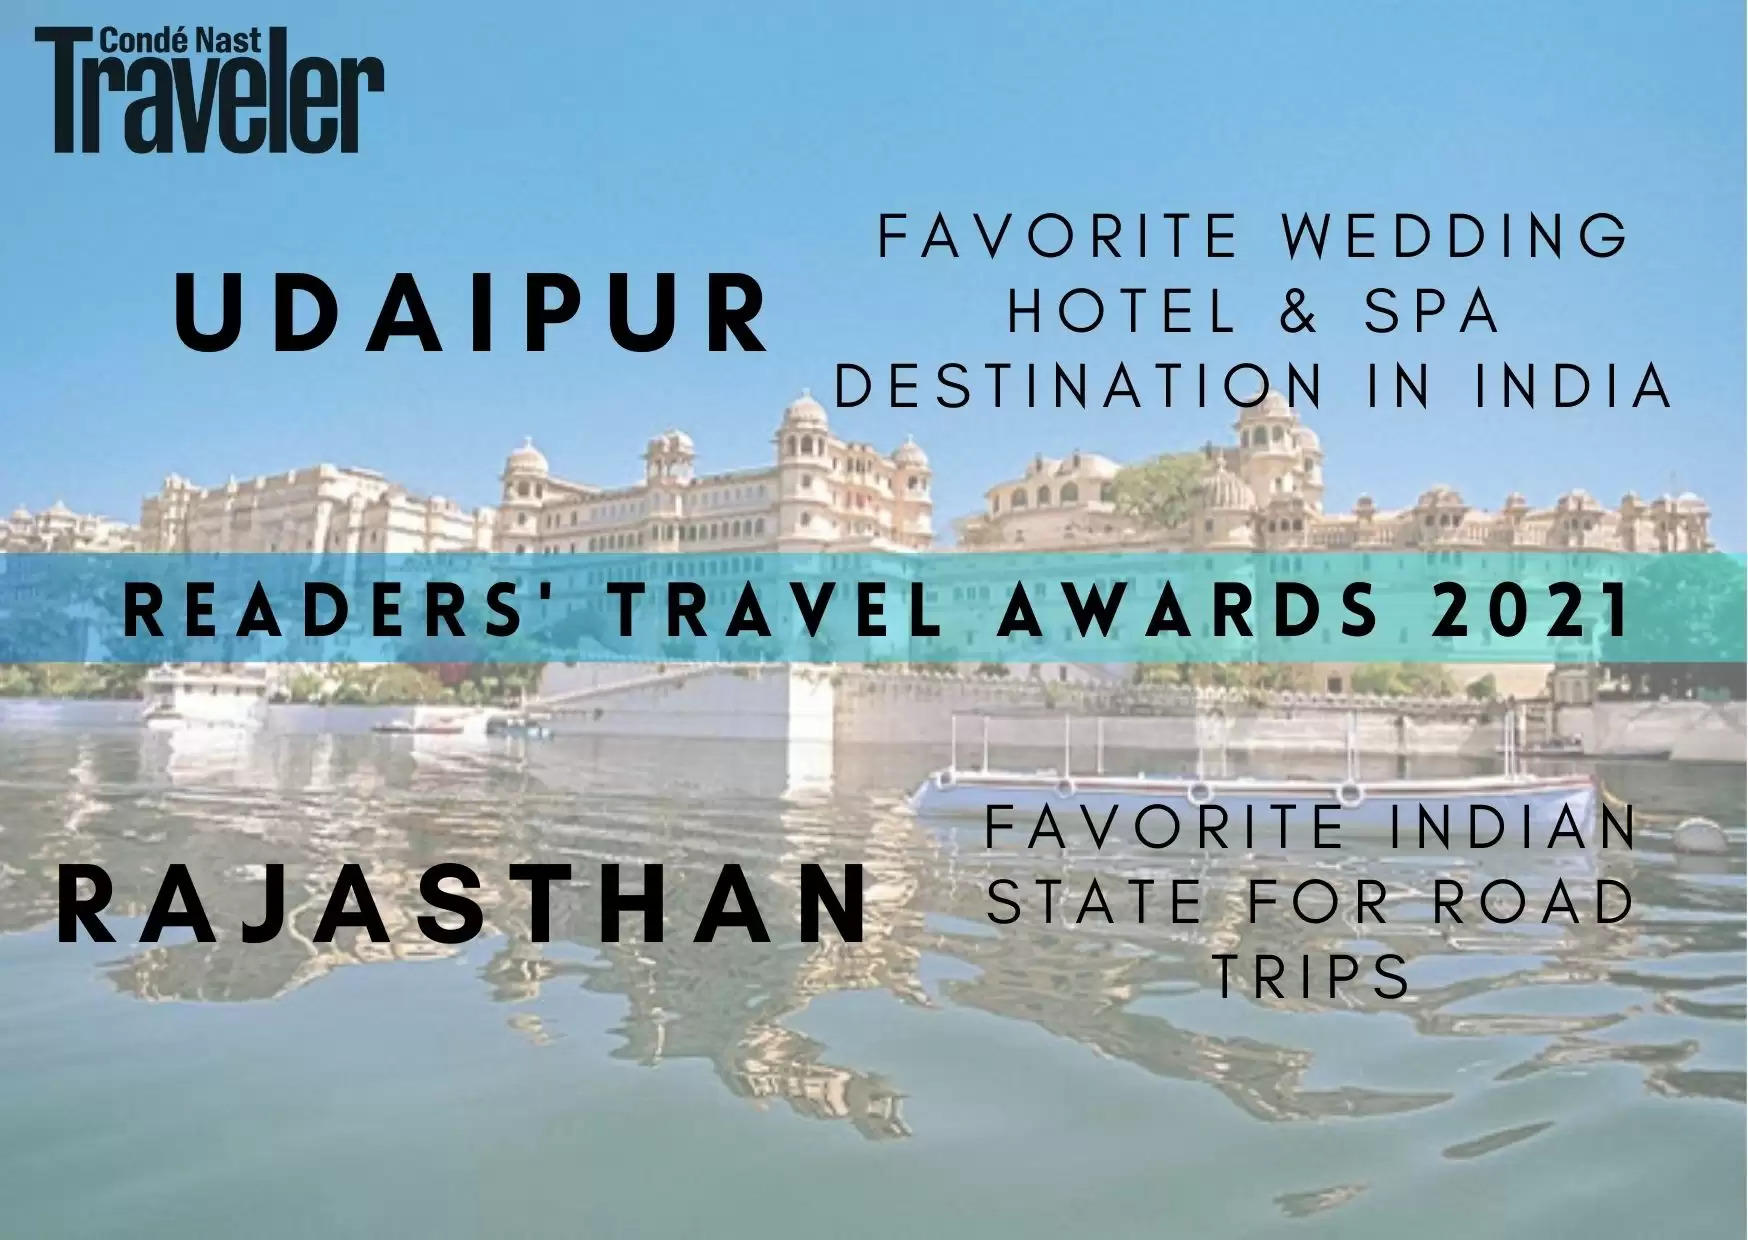 Udaipur Favorite Wedding Hotels and Spa The Leela Hotel Rajasthan Favorite and Safest State for Road Trips in India